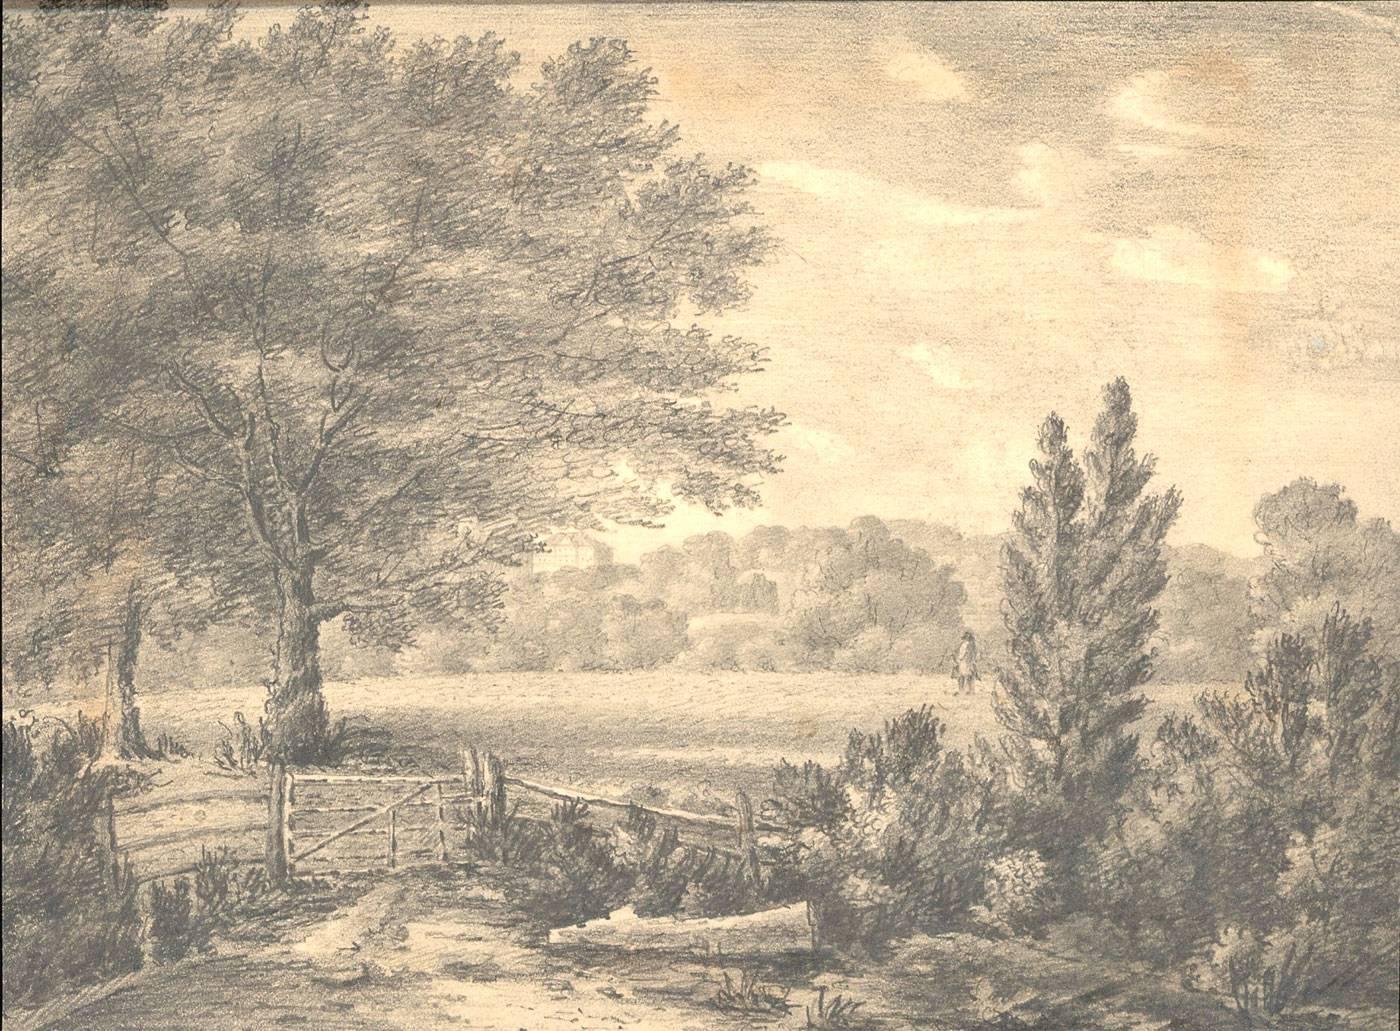 An album of approximately 48 fine graphite drawings and sepia watercolours, showing views of Warwickshire locations which have connections with the prominent Greenway family. Locations include Hams Hall, the Old Palace at Kingsbury, Kenilworth